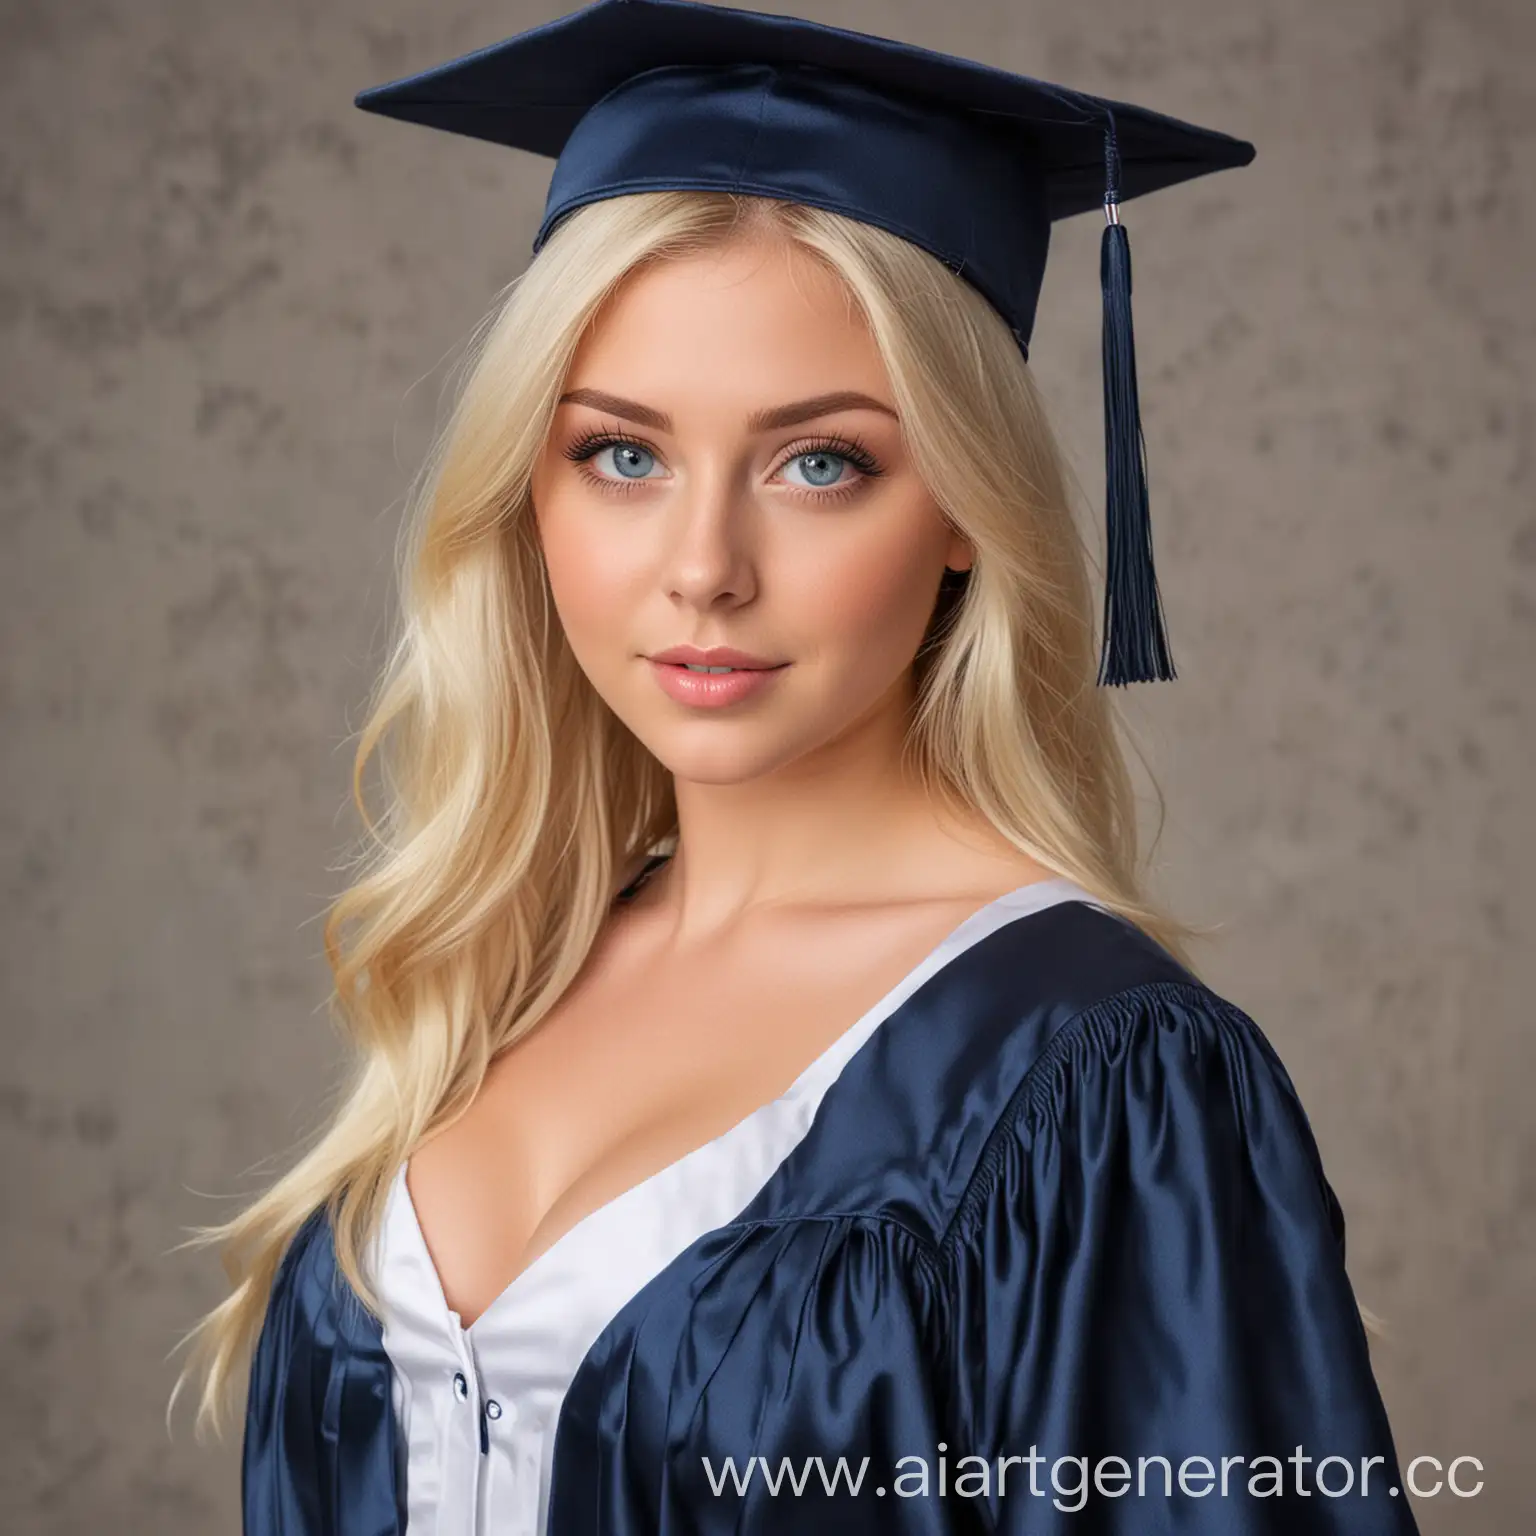 Blonde-Graduation-Girl-with-Emphasized-Figure